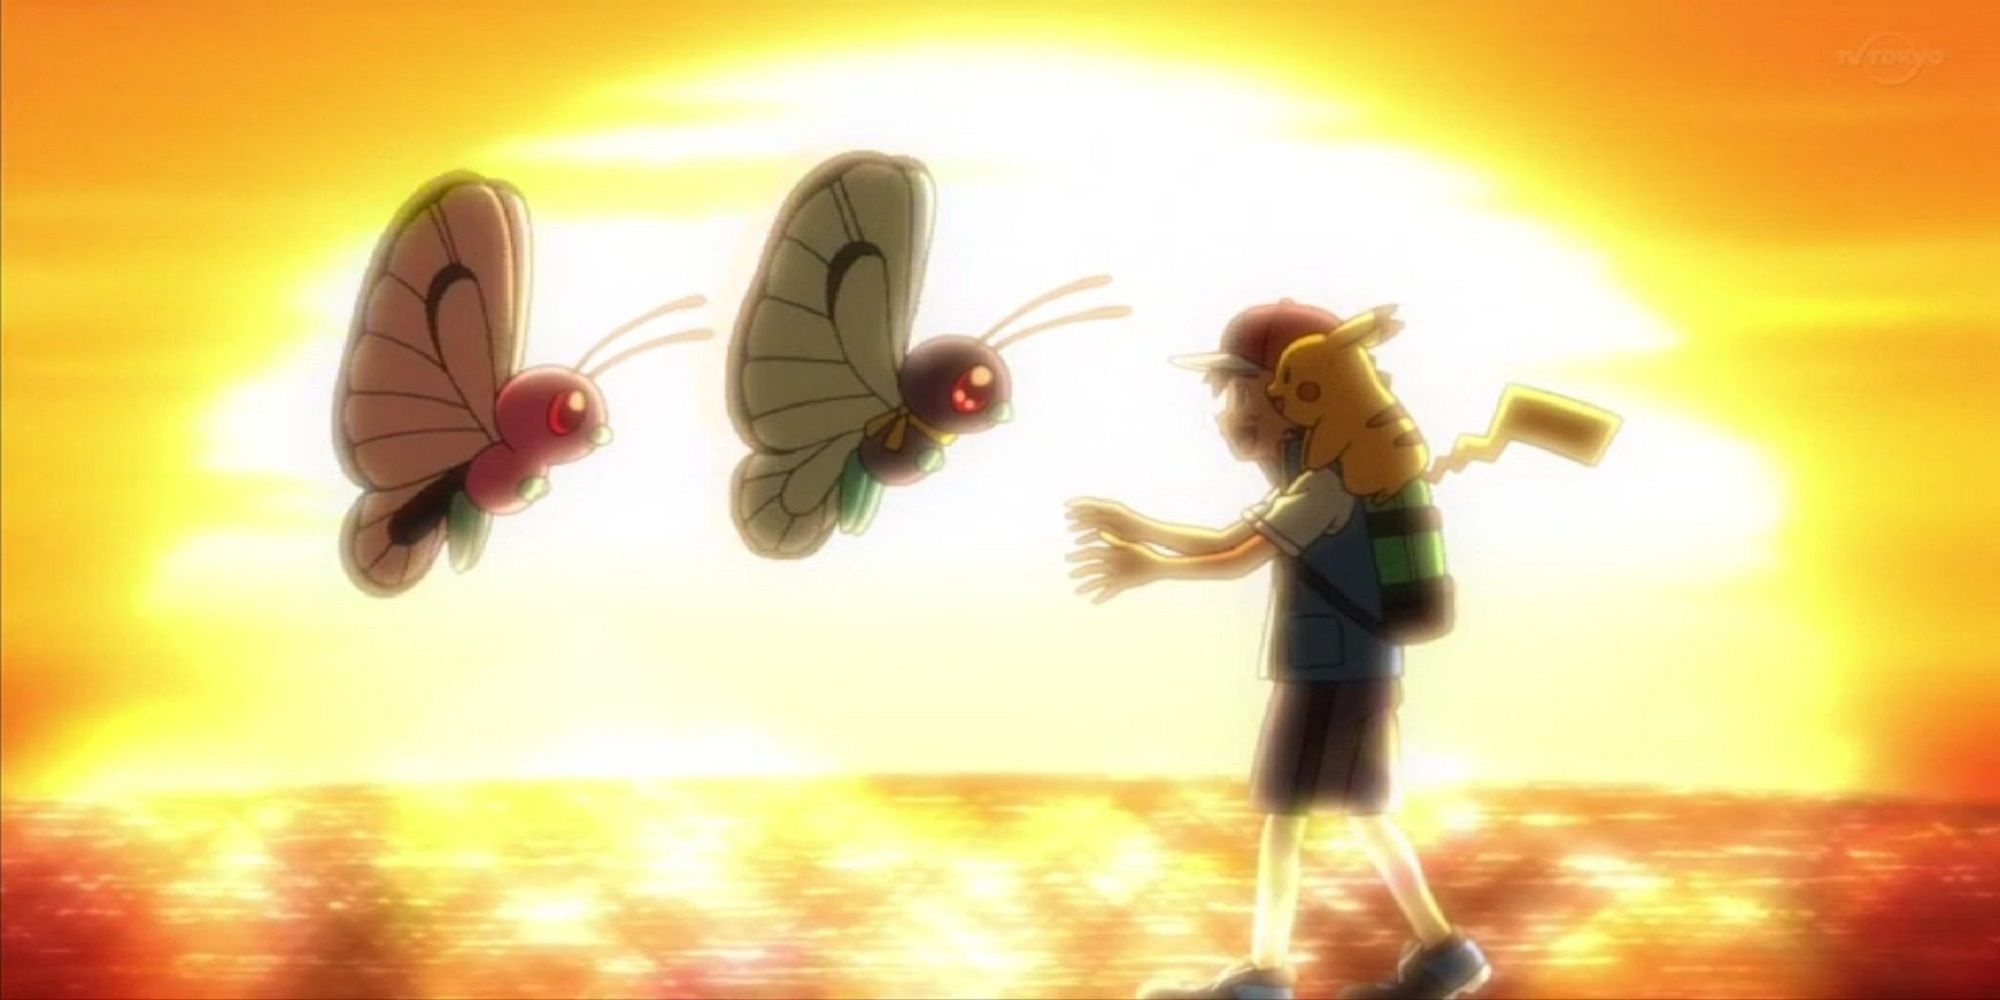 Pokémon's Anime Introduced One Feature the Games Need to Adopt